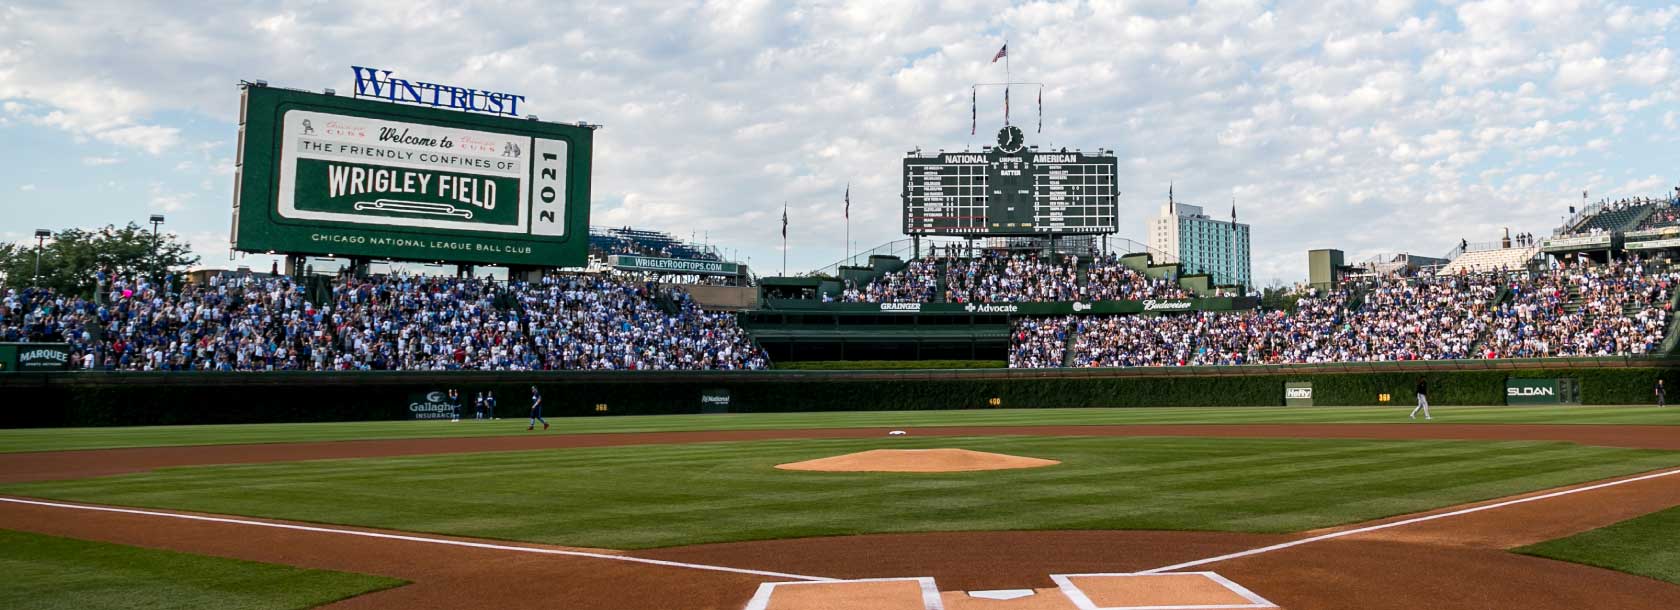 Wrigley Field Photograph  Chicago Cubs Sign  Tracey Capone Photography   Tracey Capone Fine Art